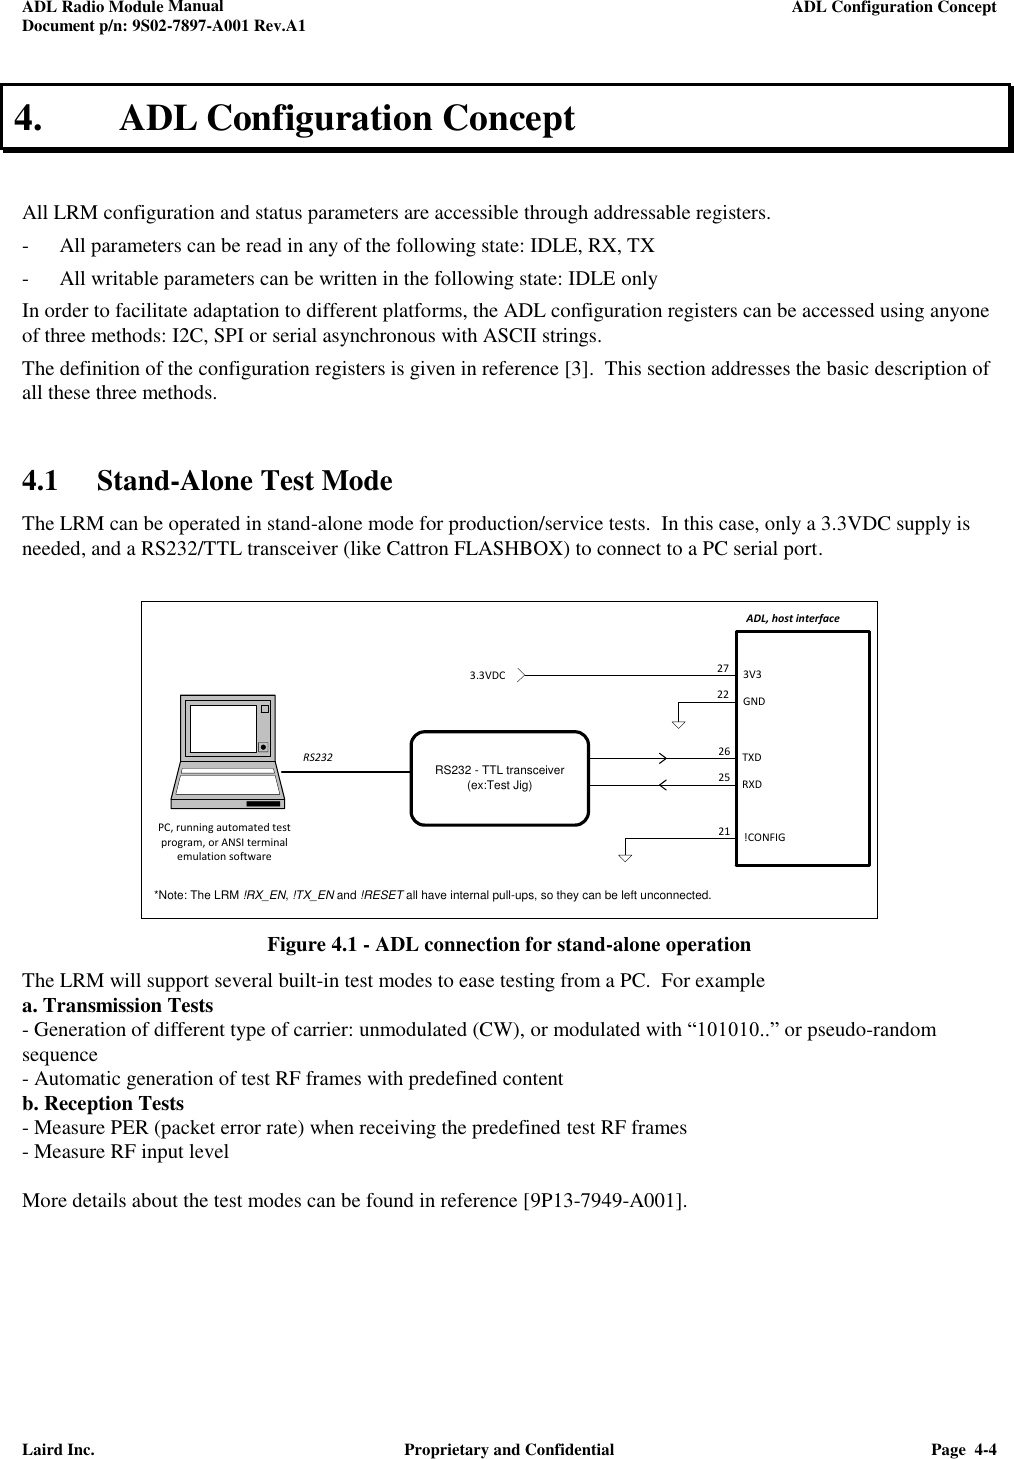 ADL Radio Module Manual     ADL Configuration Concept  Document p/n: 9S02-7897-A001 Rev.A1  Laird Inc.  Proprietary and Confidential  Page  4-4  4. ADL Configuration Concept  All LRM configuration and status parameters are accessible through addressable registers. - All parameters can be read in any of the following state: IDLE, RX, TX - All writable parameters can be written in the following state: IDLE only In order to facilitate adaptation to different platforms, the ADL configuration registers can be accessed using anyone of three methods: I2C, SPI or serial asynchronous with ASCII strings. The definition of the configuration registers is given in reference [3].  This section addresses the basic description of all these three methods.    4.1 Stand-Alone Test Mode  The LRM can be operated in stand-alone mode for production/service tests.  In this case, only a 3.3VDC supply is needed, and a RS232/TTL transceiver (like Cattron FLASHBOX) to connect to a PC serial port.   21ADL, host interface26RXDTXD25!CONFIG3V3GND2722RS232 - TTL transceiver(ex:Test Jig)3.3VDCRS232PC, running automated test program, or ANSI terminal emulation software*Note: The LRM !RX_EN, !TX_EN and !RESET all have internal pull-ups, so they can be left unconnected. Figure 4.1 - ADL connection for stand-alone operation The LRM will support several built-in test modes to ease testing from a PC.  For example  a. Transmission Tests  - Generation of different type of carrier: unmodulated (CW), or modulated with “101010..” or pseudo-random sequence - Automatic generation of test RF frames with predefined content b. Reception Tests - Measure PER (packet error rate) when receiving the predefined test RF frames - Measure RF input level  More details about the test modes can be found in reference [9P13-7949-A001].      